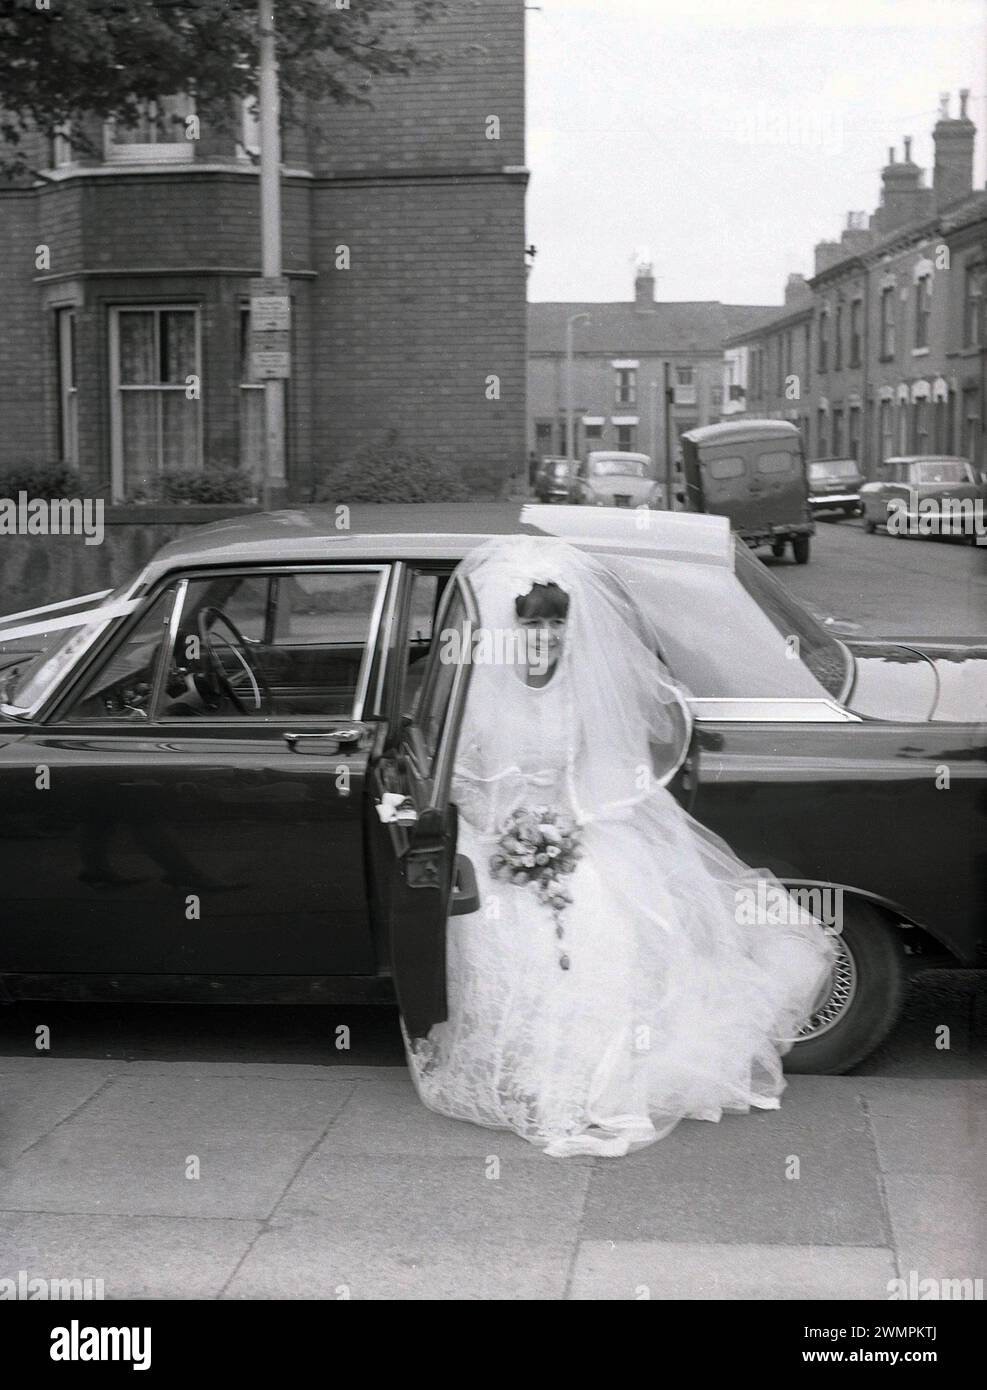 1960s, historical, outside in an urban street, a bride in her wedding dress and veil, getting out of the back of her wedding car, a Ford Zephyr MK3 of the era, England, UK. Stock Photo